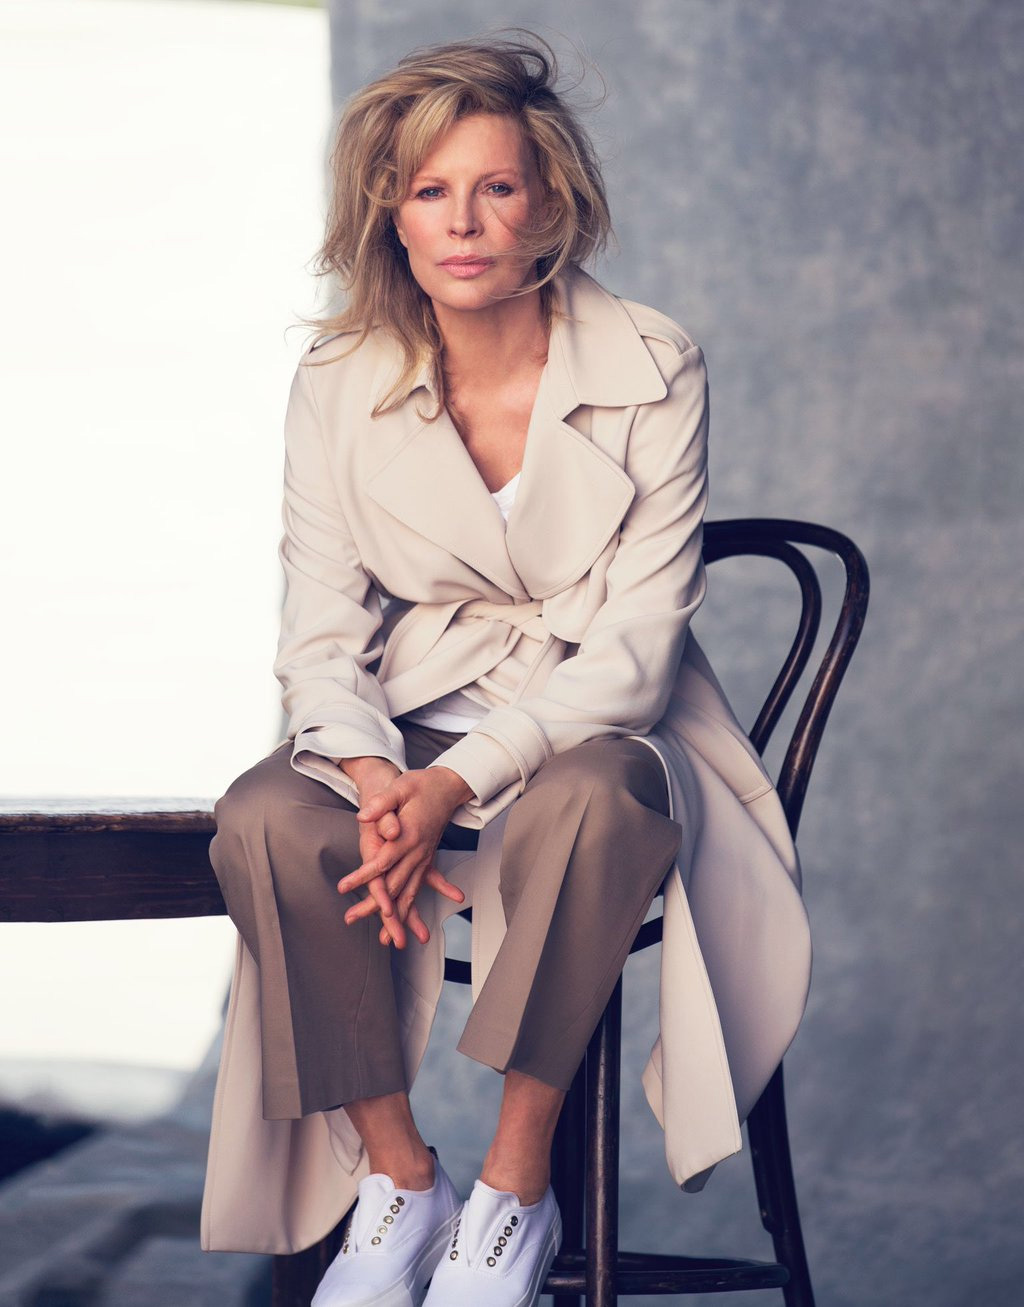 Kim Basinger by David Bellemere. Coat by Theory, pants by The Row, sneakers by Eytys, t-shitrt by James Perse